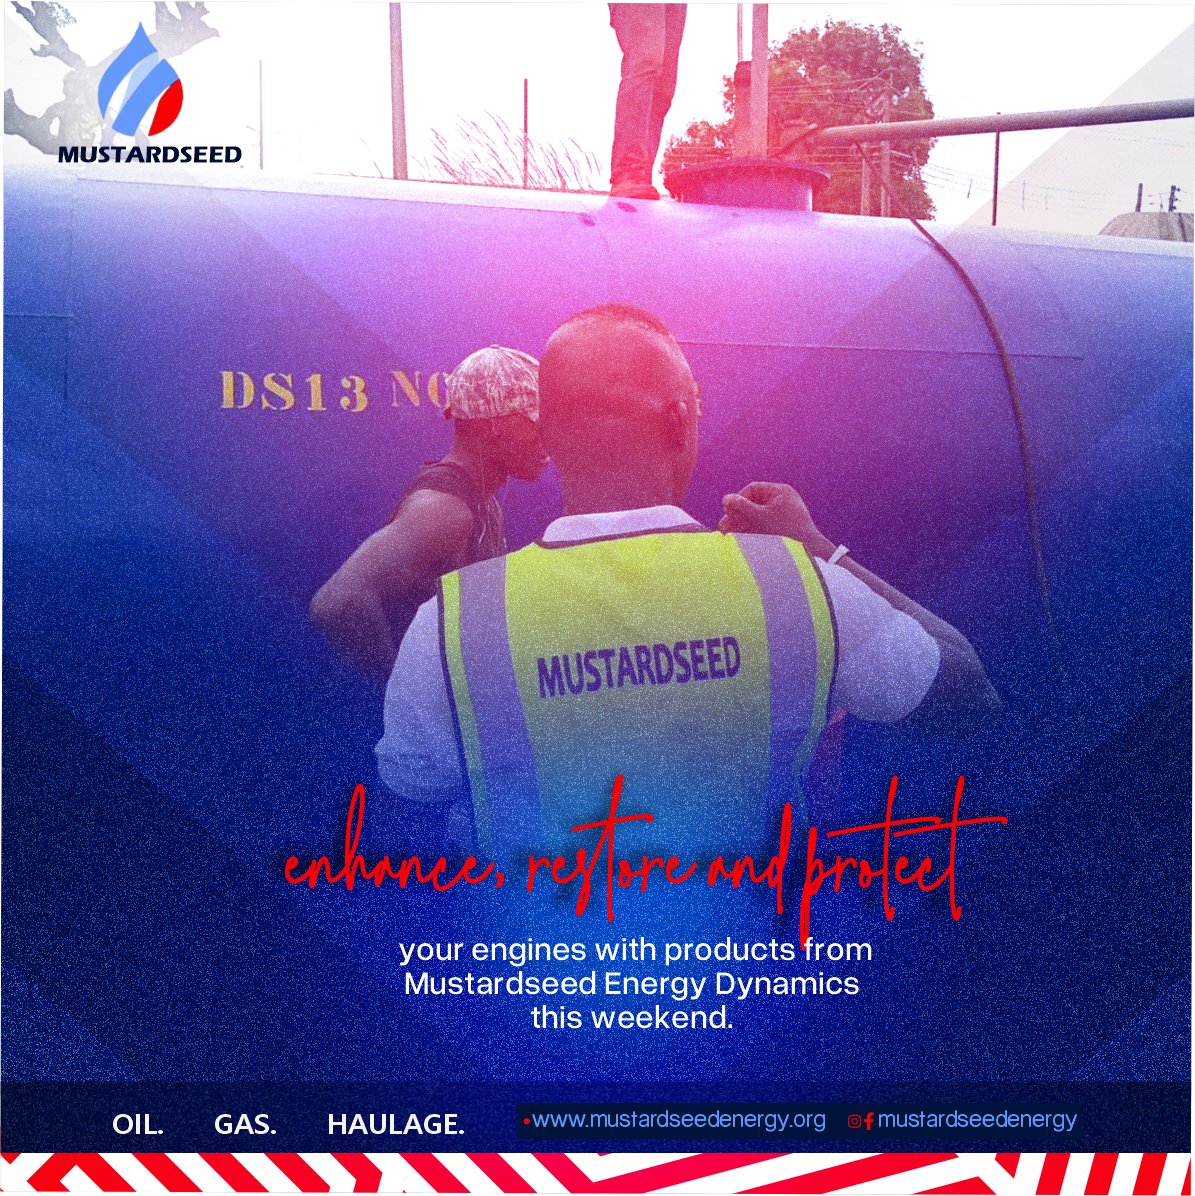 Did you know that Automotive Gas Oil also known as Diesel offers a balance of efficiency, power and reliability, making it a preferred choice for many   commercial and industrial applications?  
We are just one call away to serve your petroleum needs this weekend.
#TGIF 
#gasoil